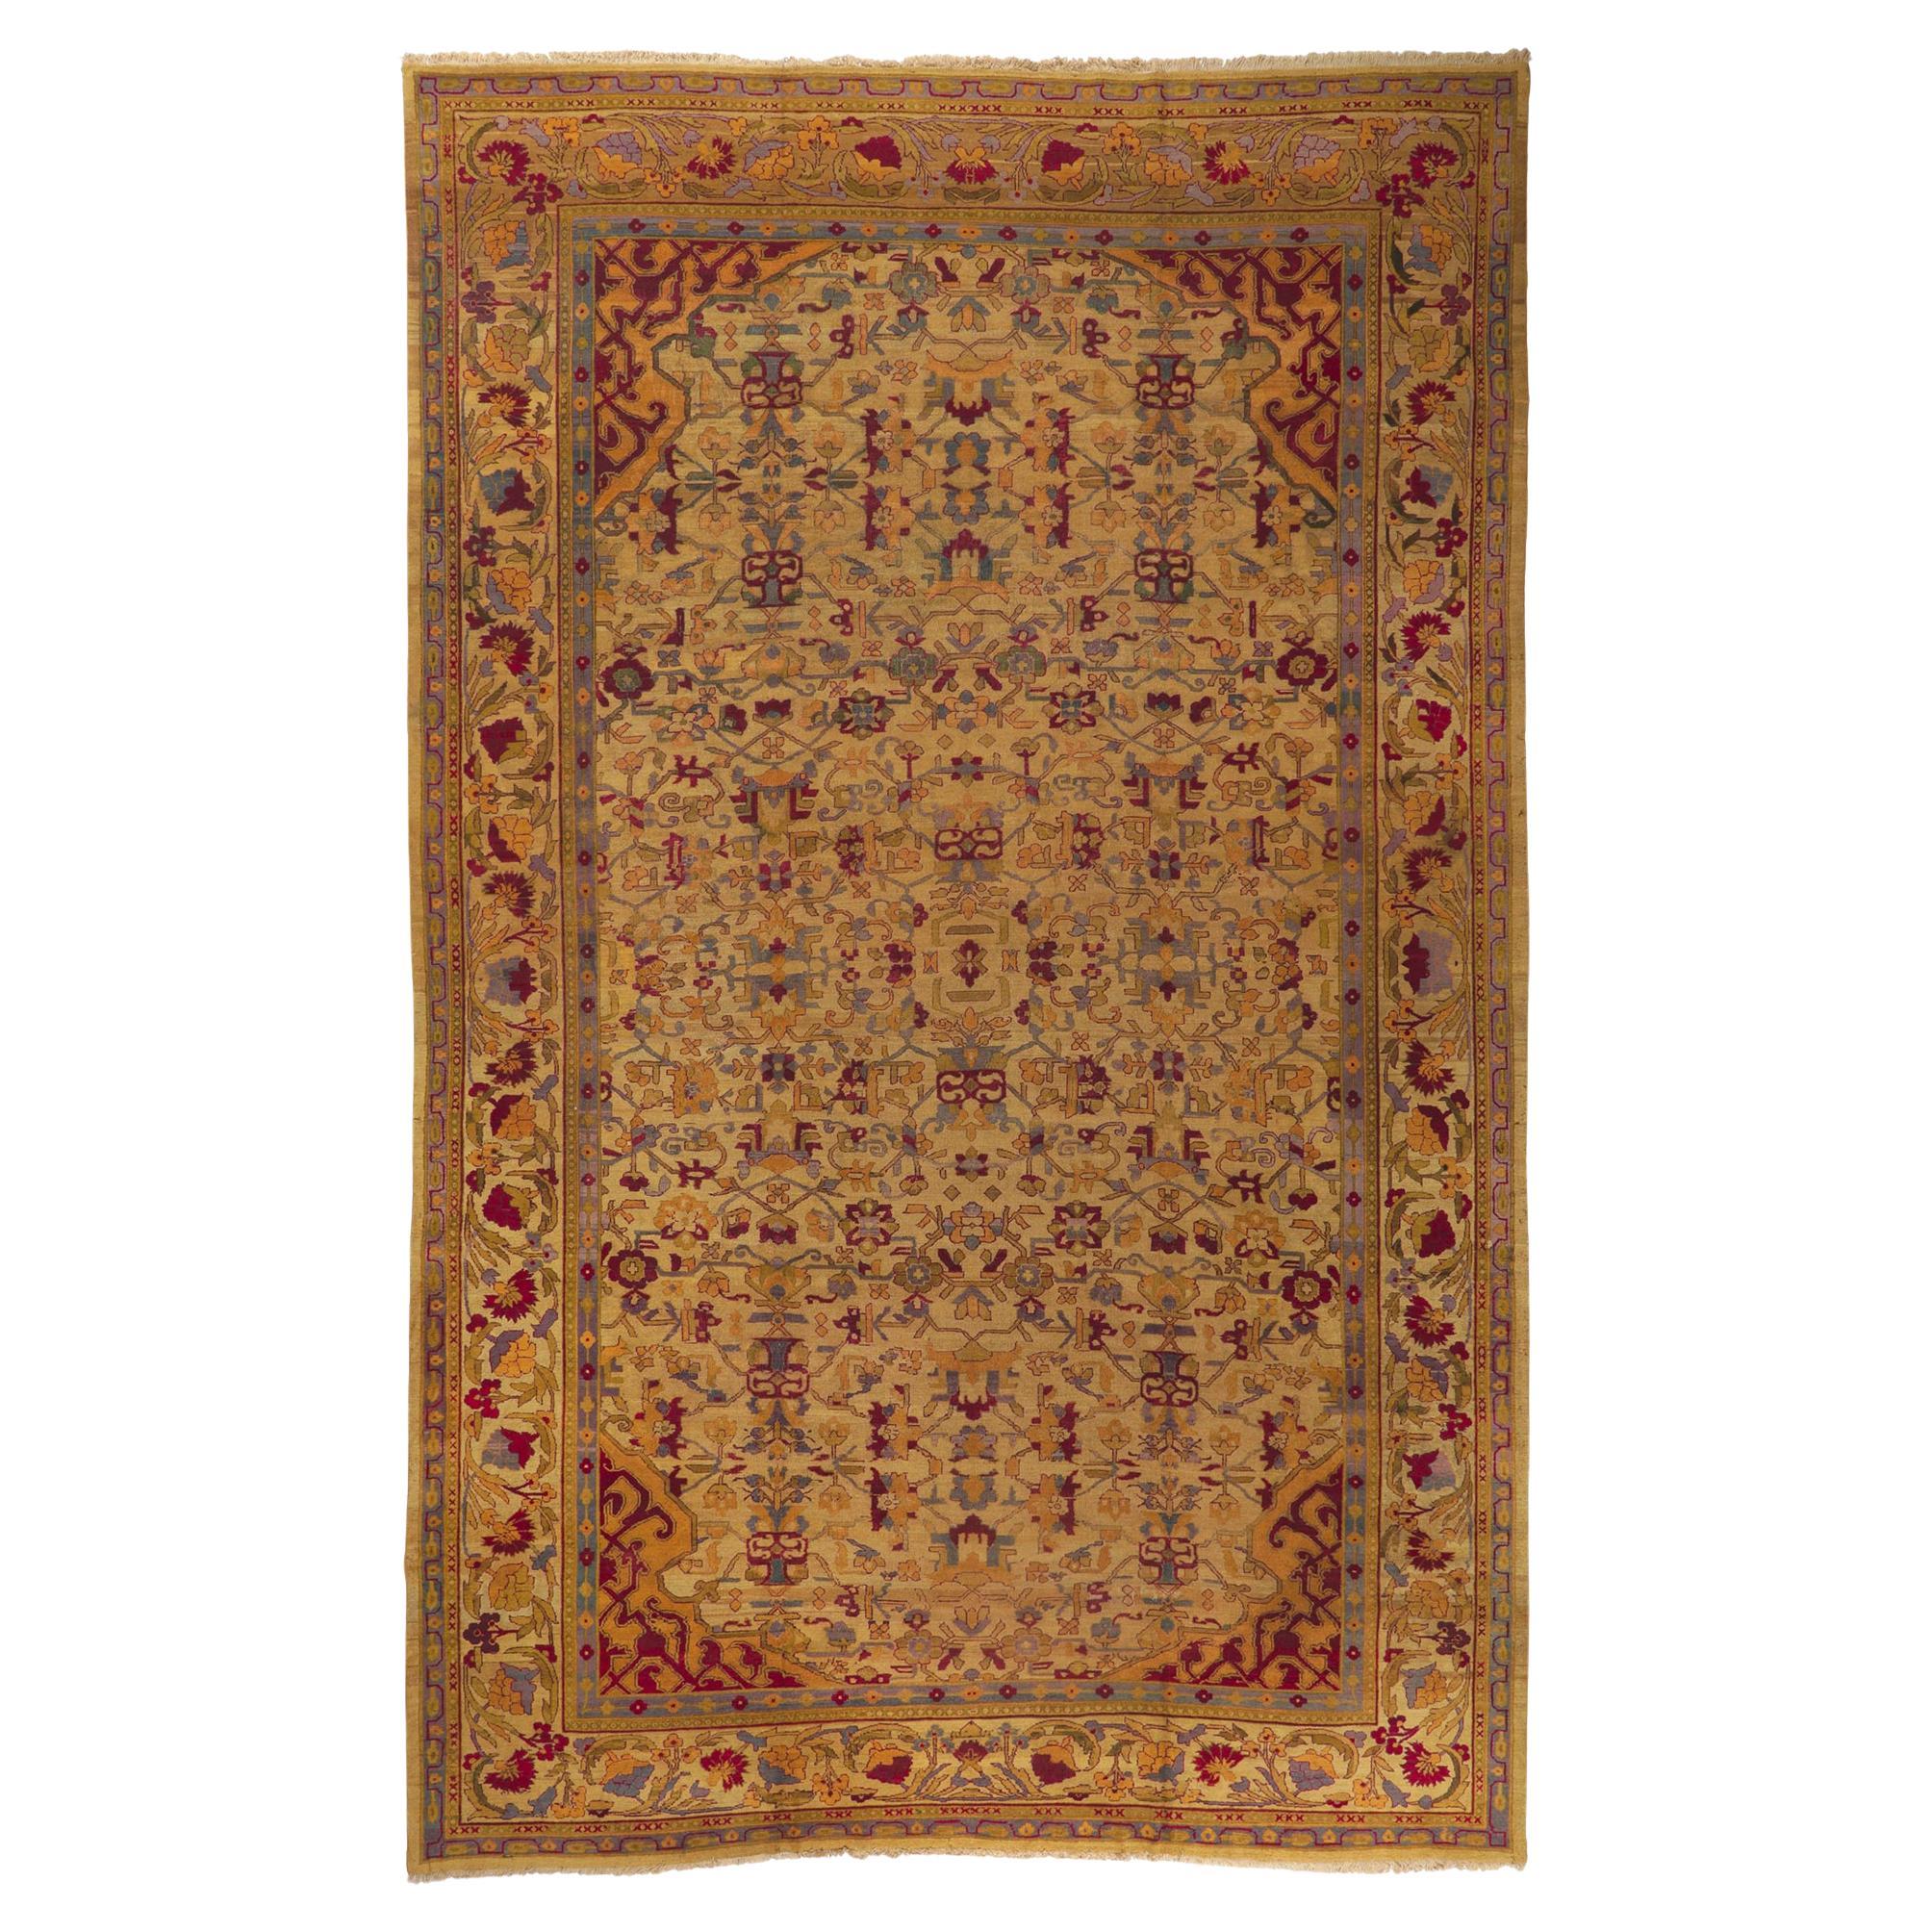 1880s Oversized Antique Indian Agra Rug, Hotel Lobby Size Carpet For Sale